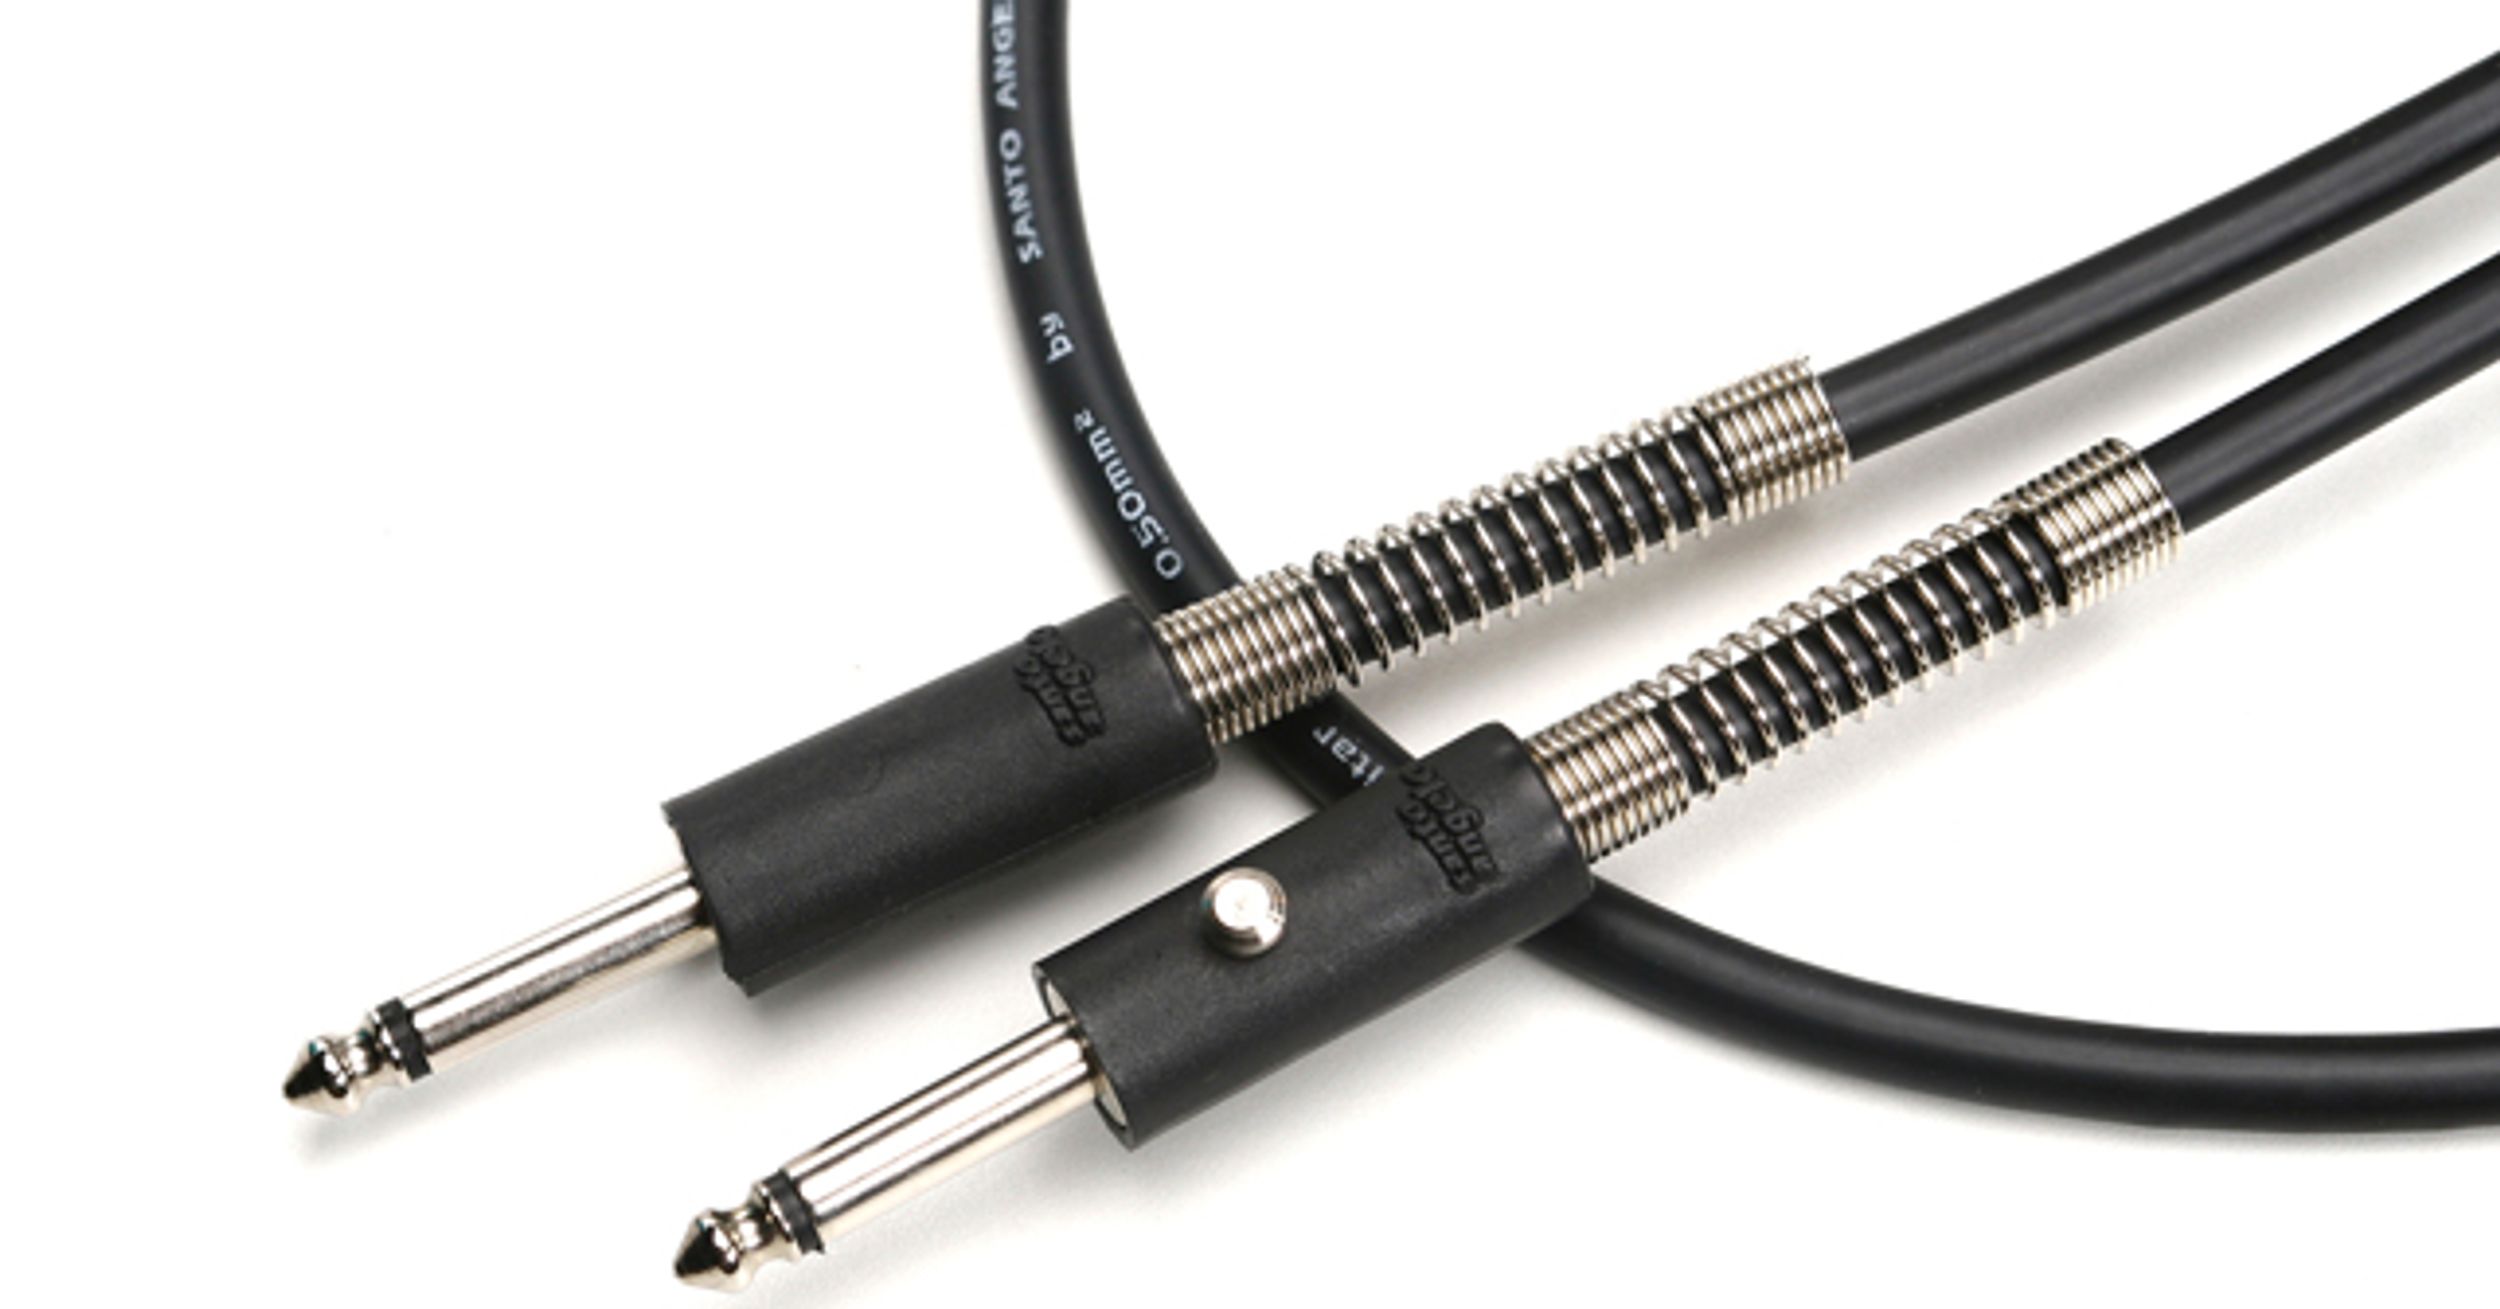 Santo Angelo Cables Launches New Line of Environmentally-Friendly Cables